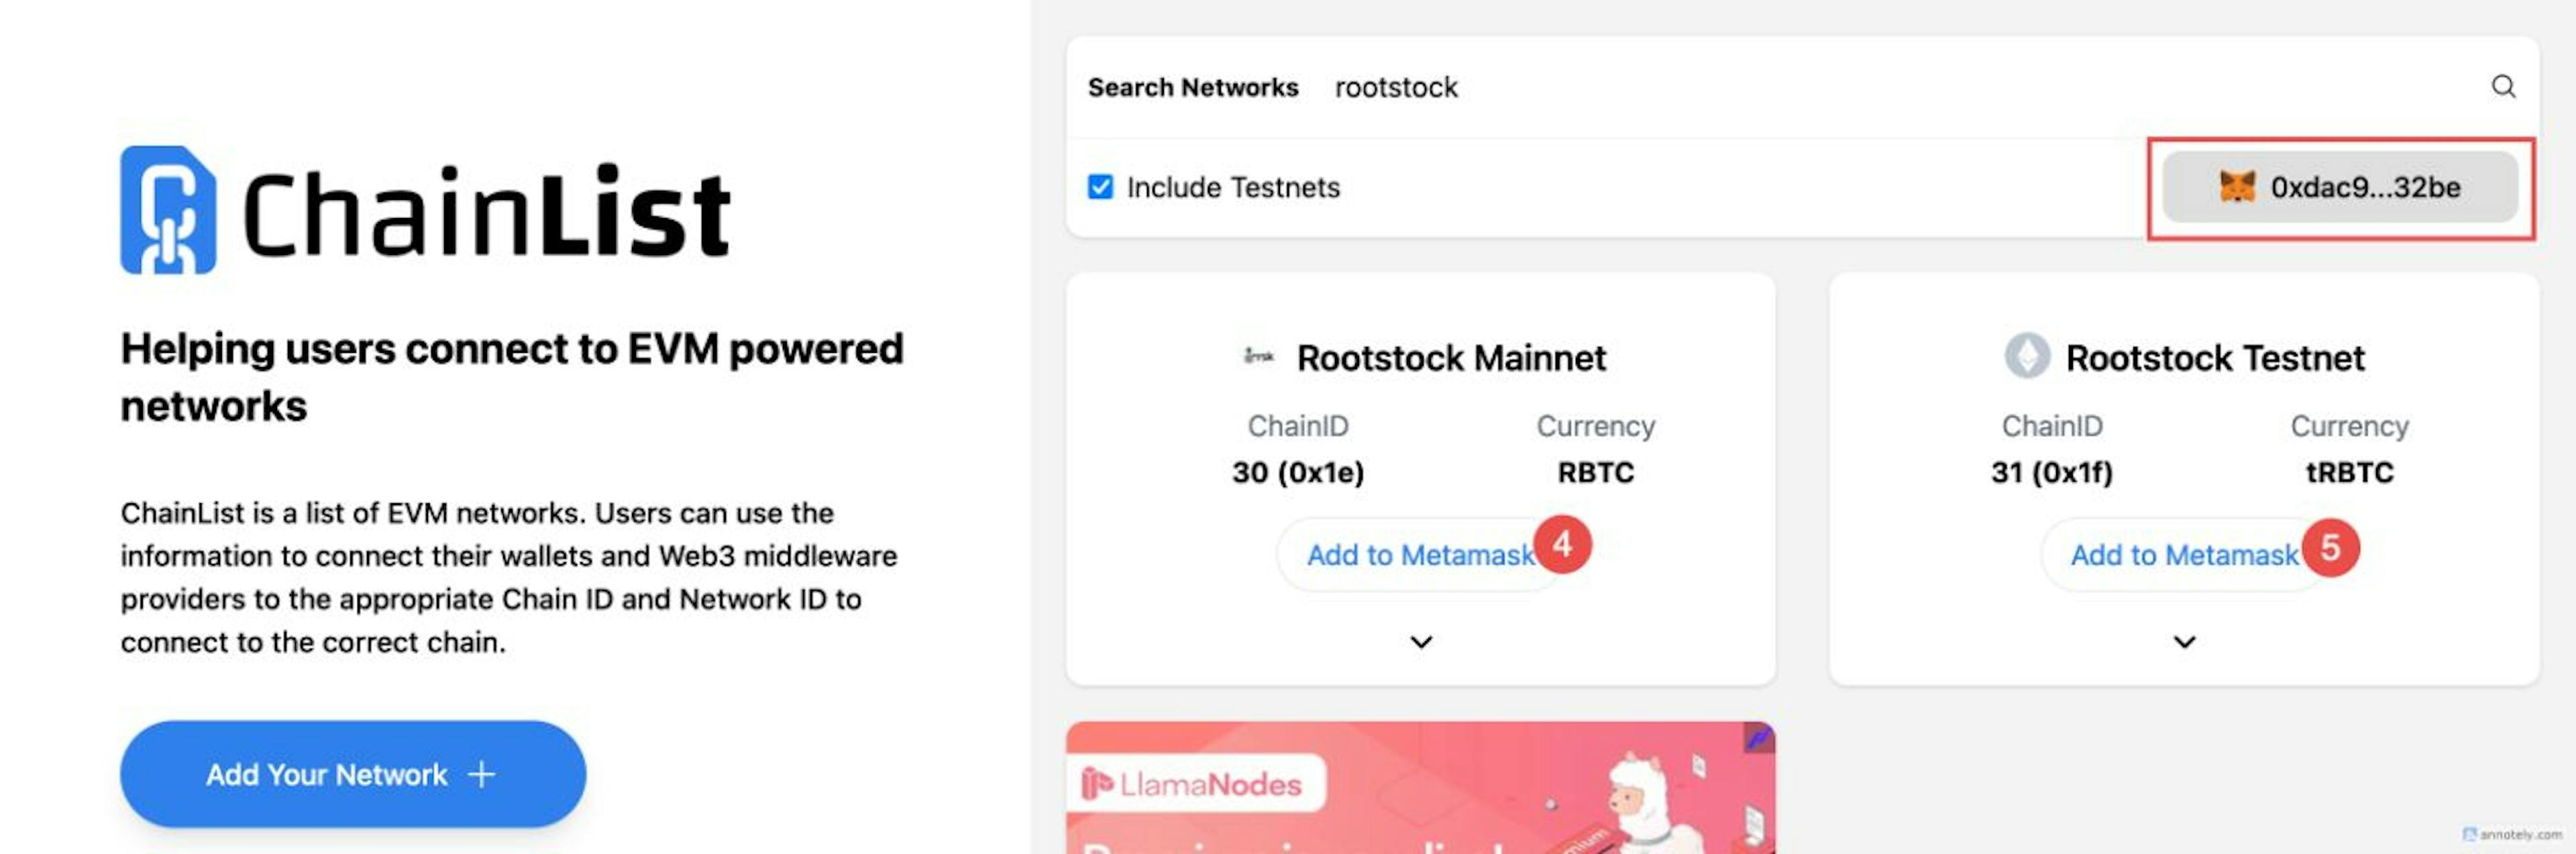 ChainList With Metamask connected